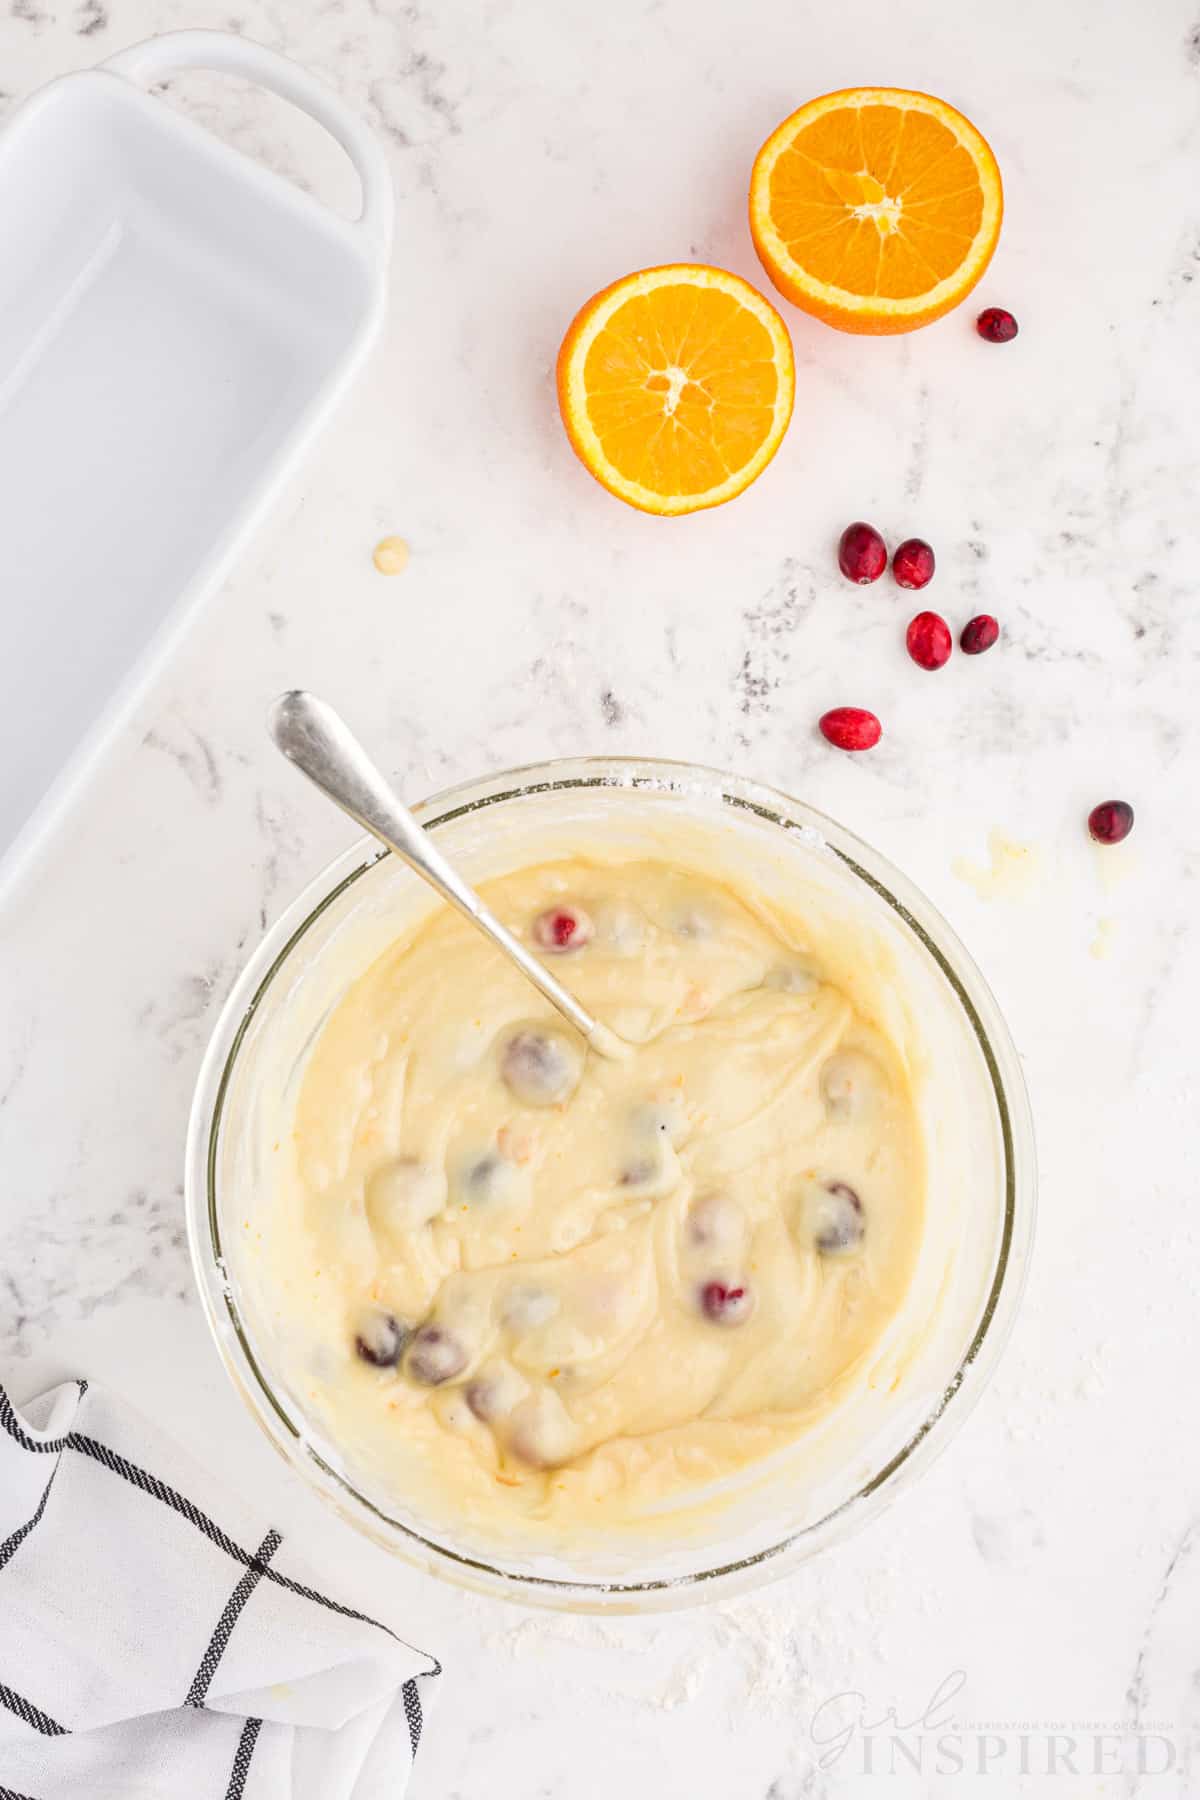 Bowl of orange cranberry bread with whole cranberries gently folded in the batter with metal spoon, white prepared loaf pan, checked linen, sliced orange, whole loose cranberries on a white marble countertop.